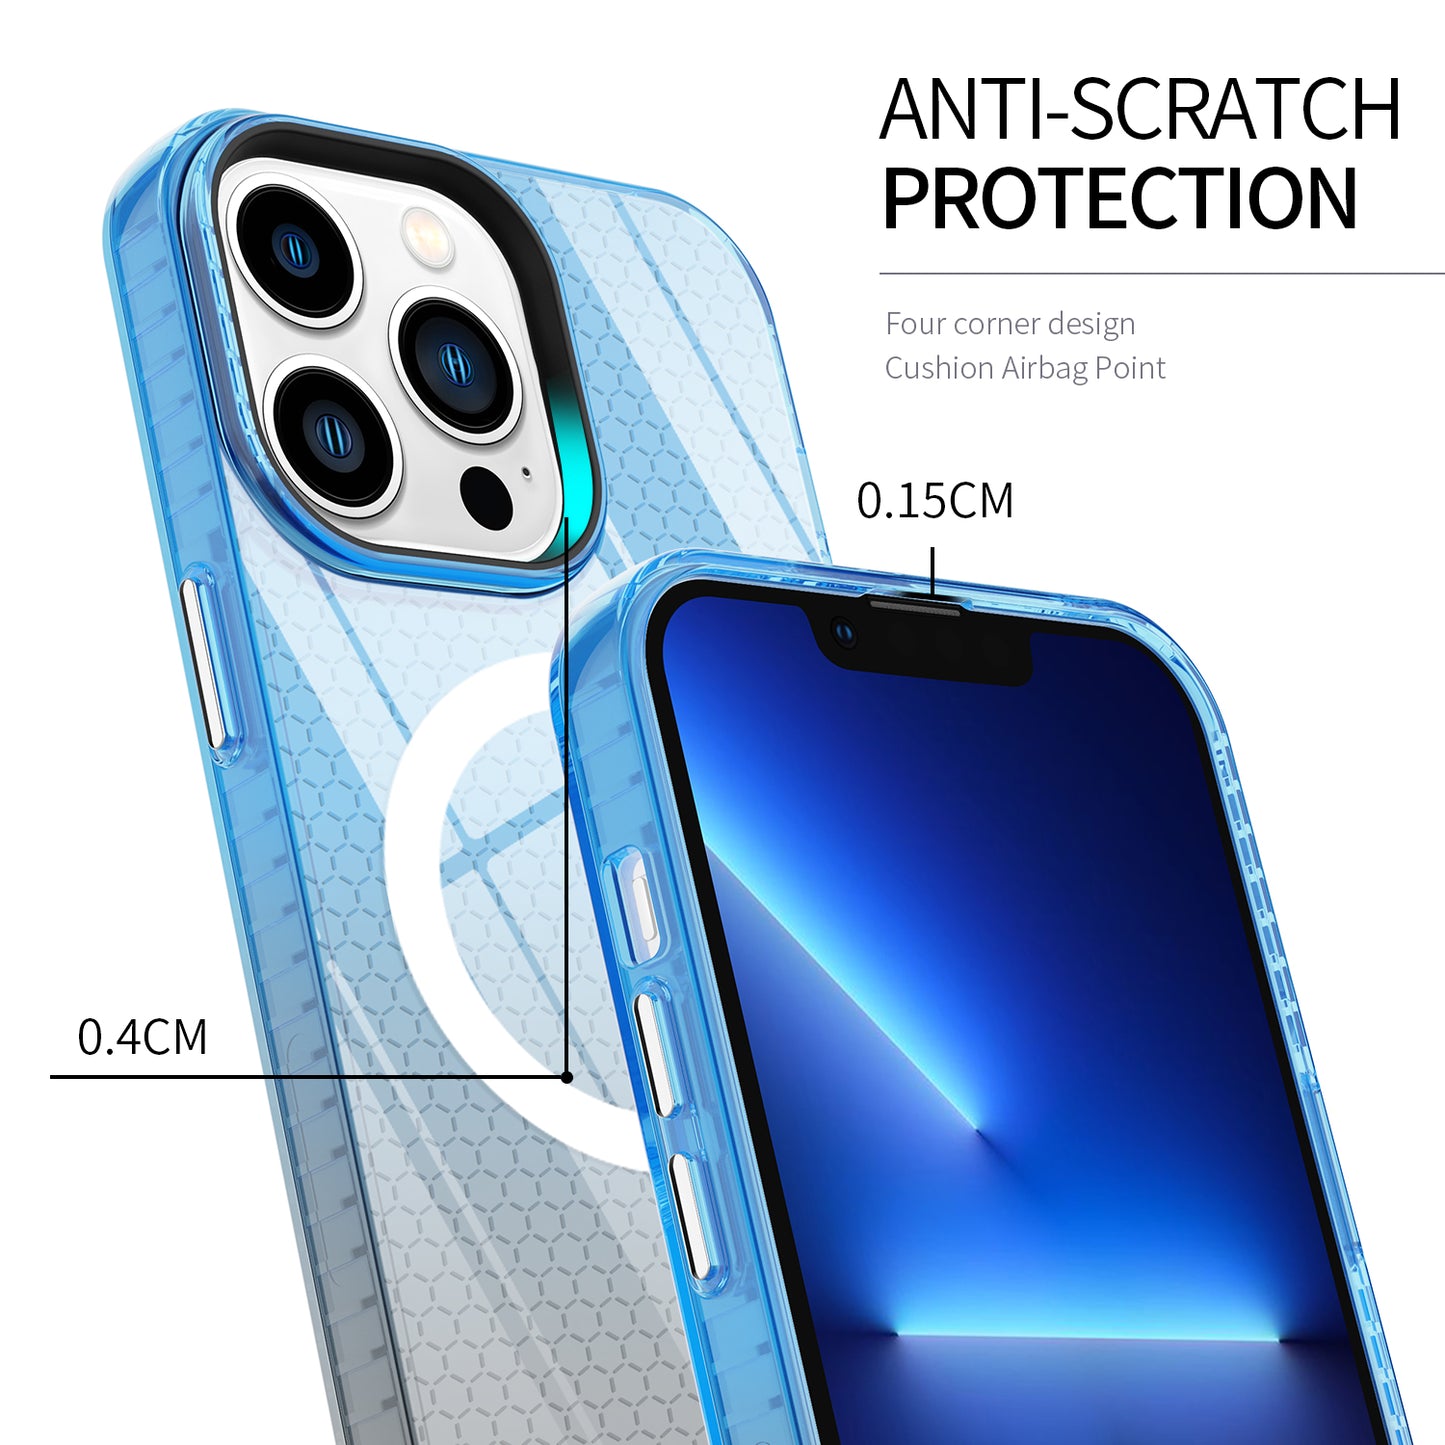 New Arrivals PC TPU Shockproof Blue And Black Pear De Phone Case For Iphone 13 Pro Max